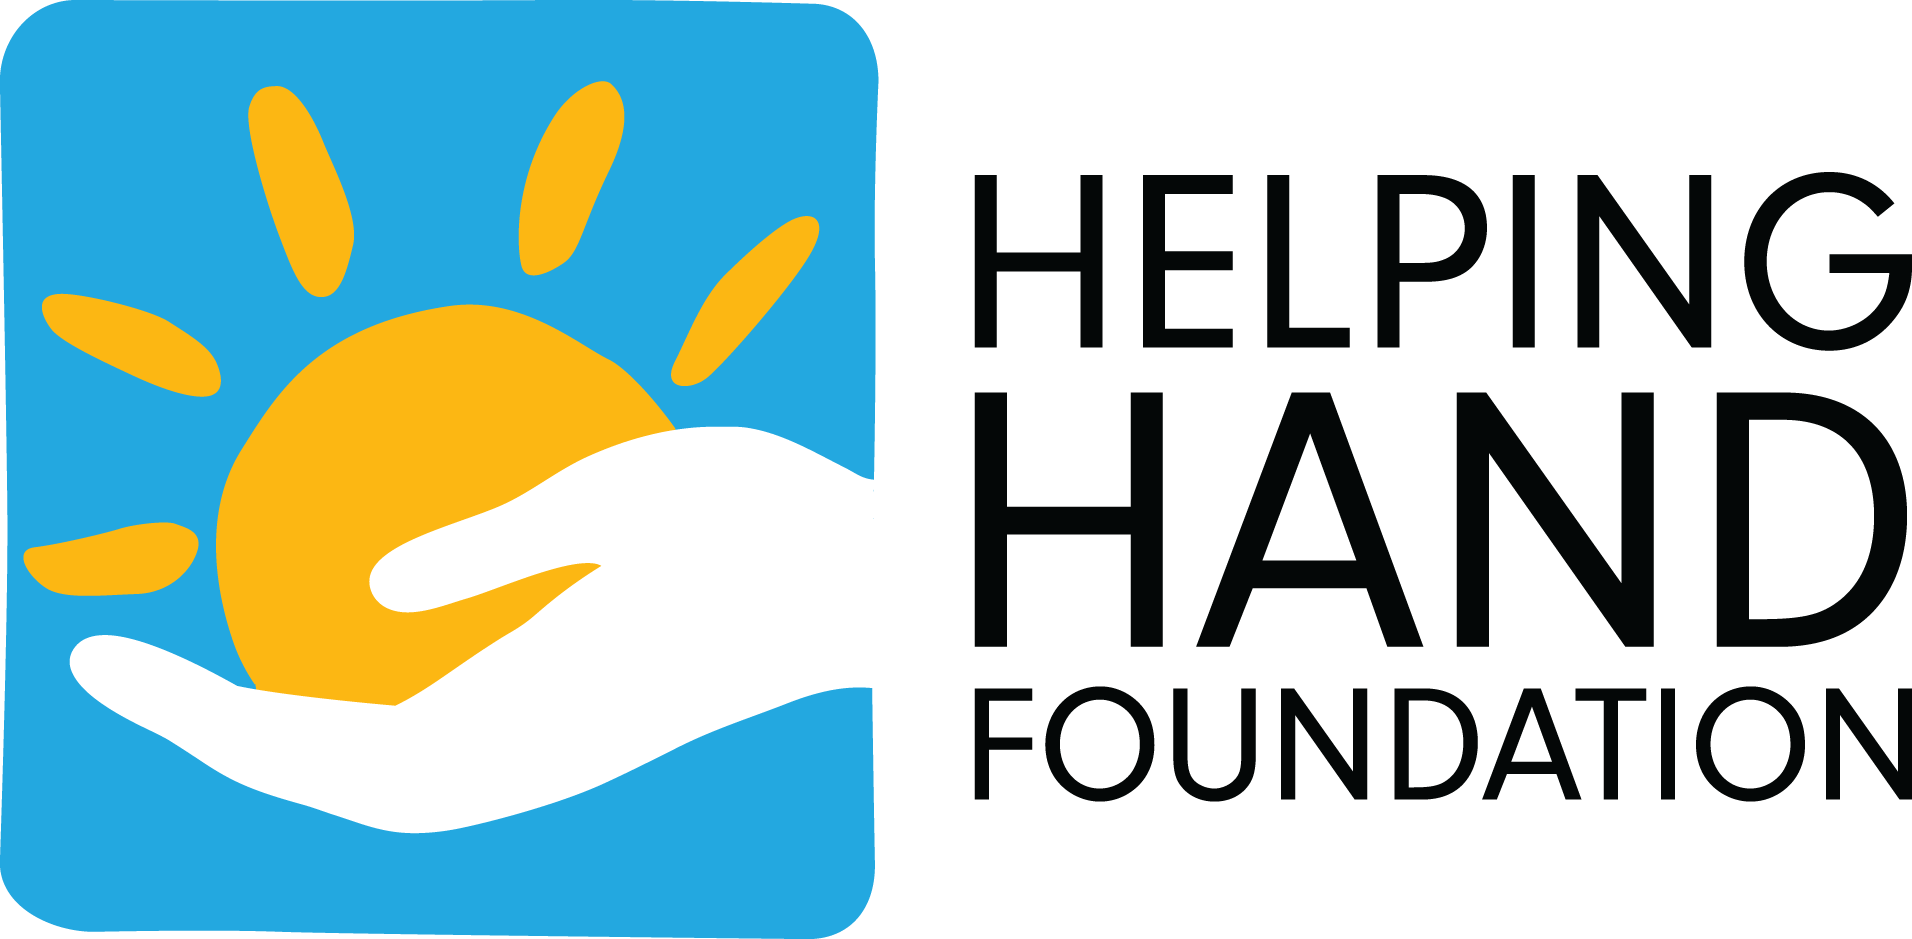 Helping hand foundation. Image: Hands holding a sun